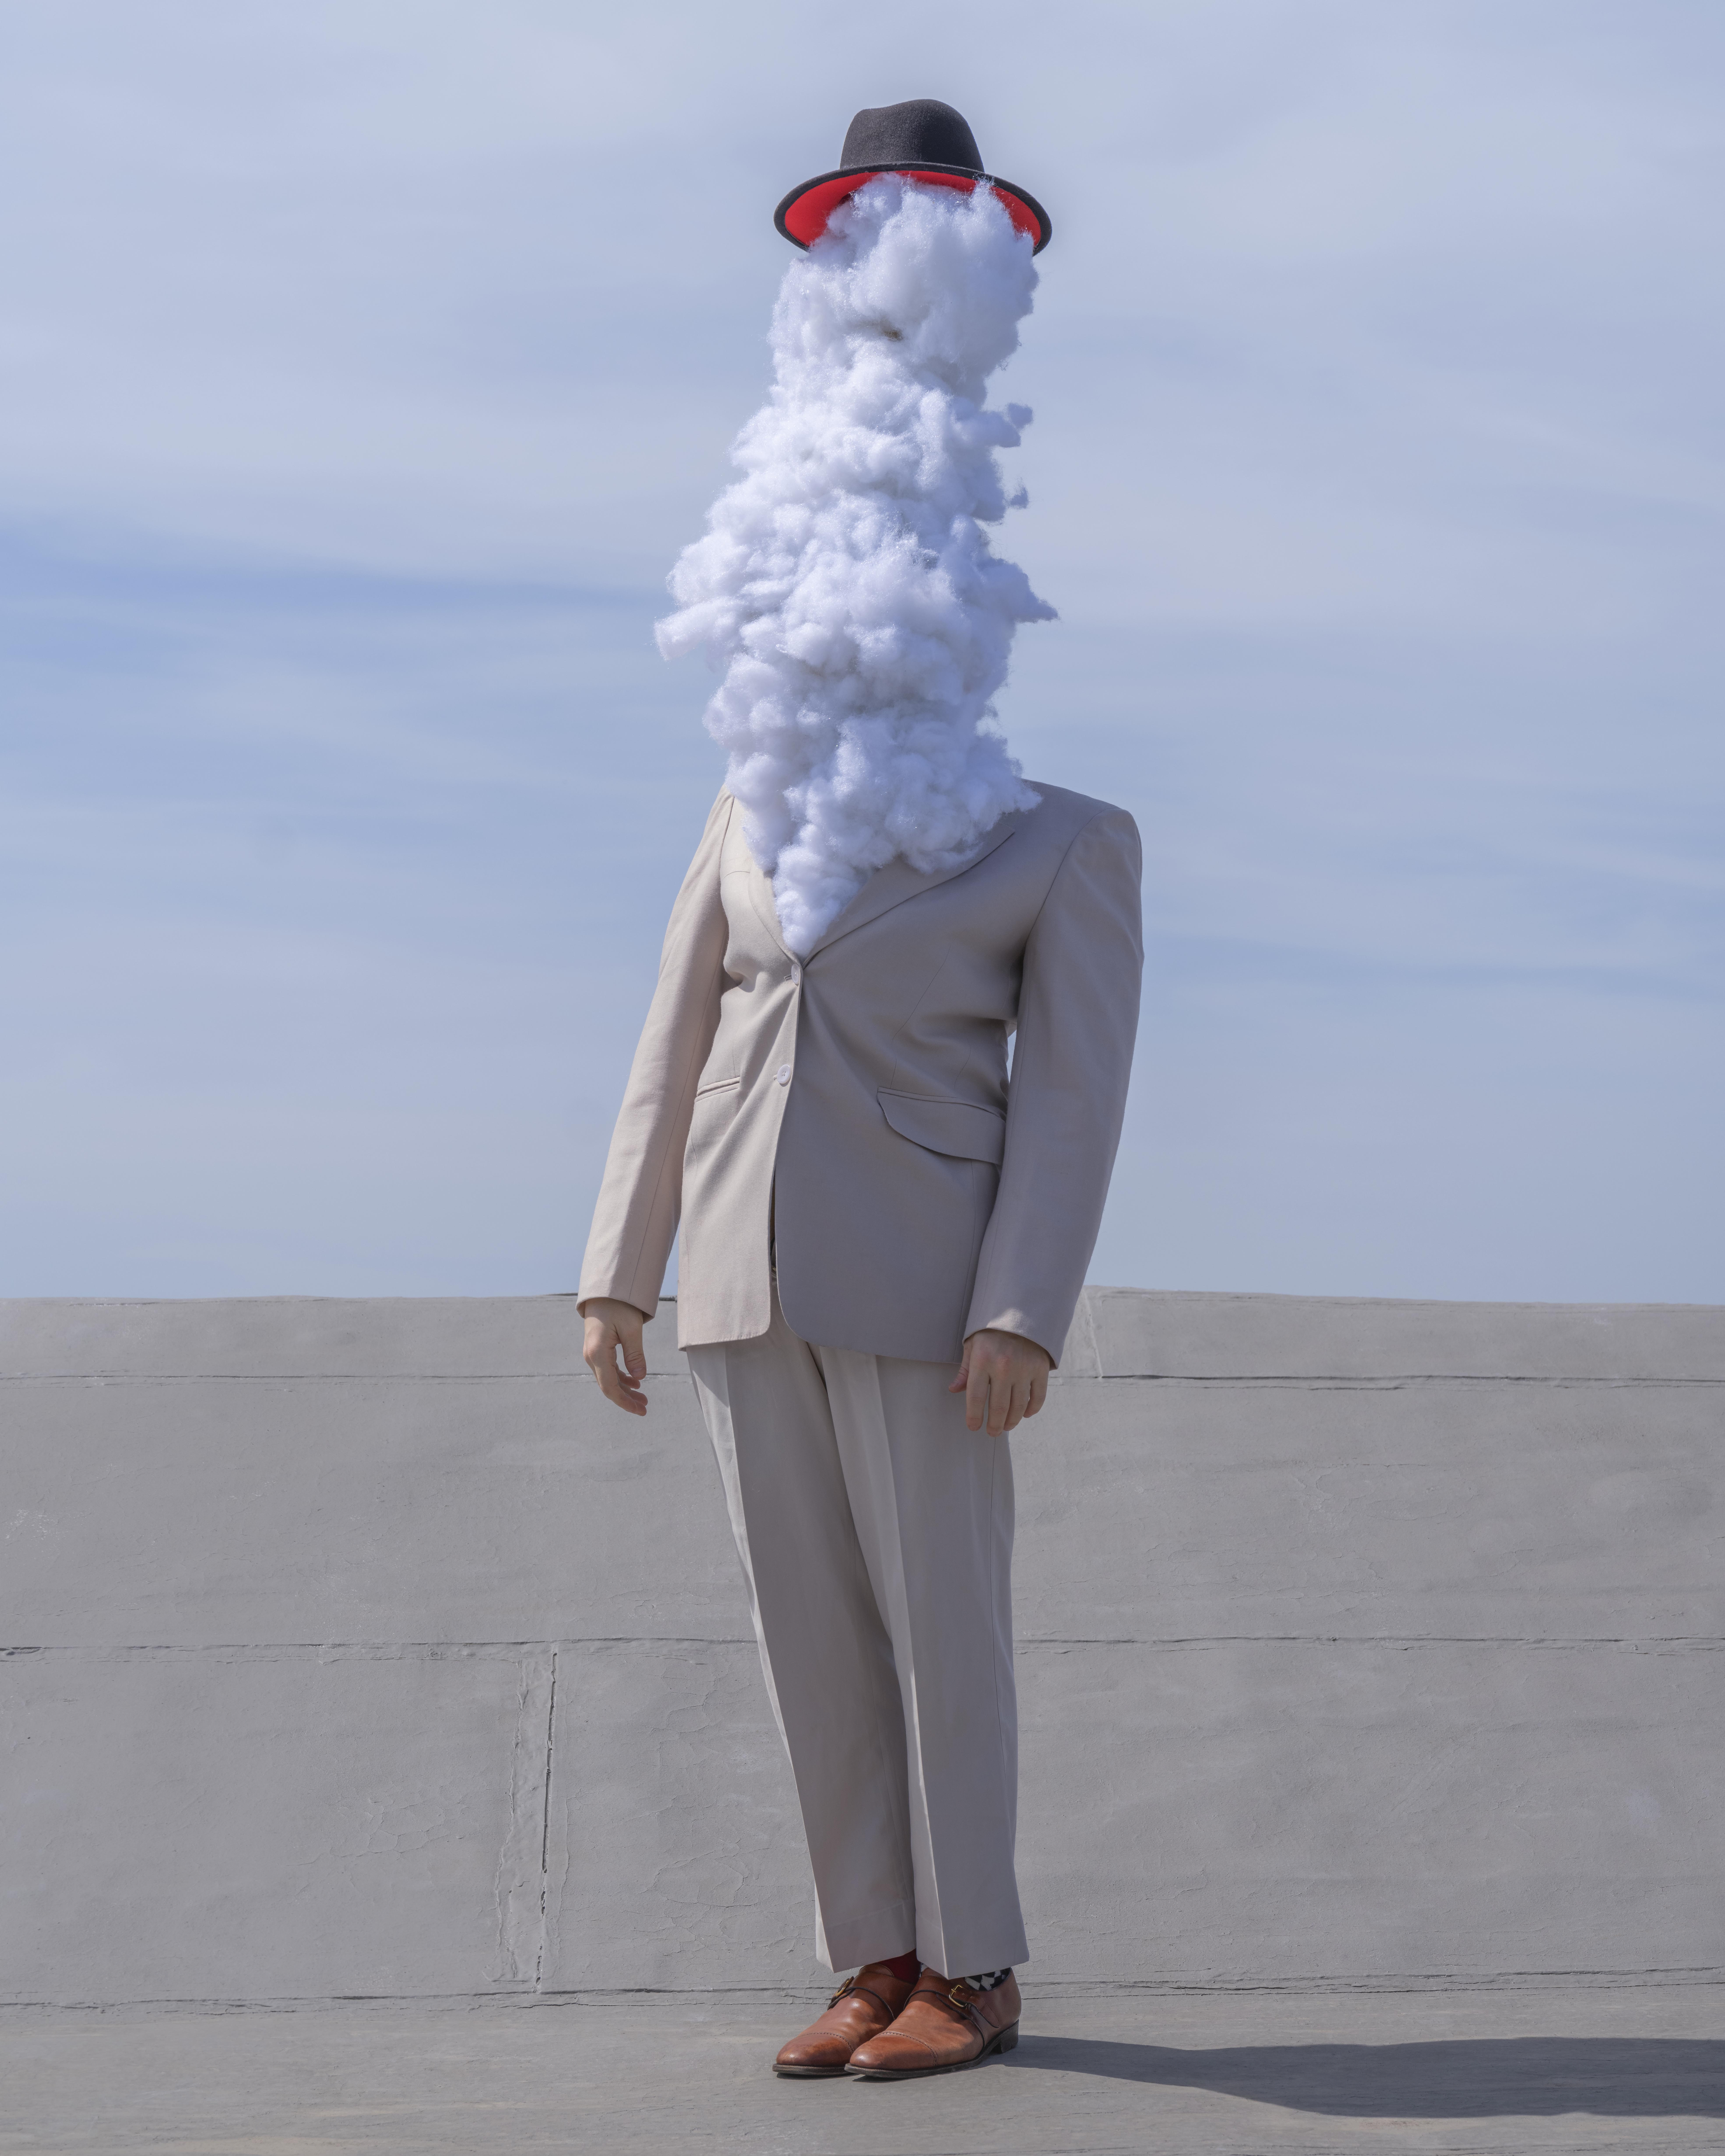 ben zank surreal self portraits surreal photography nothing to see here book